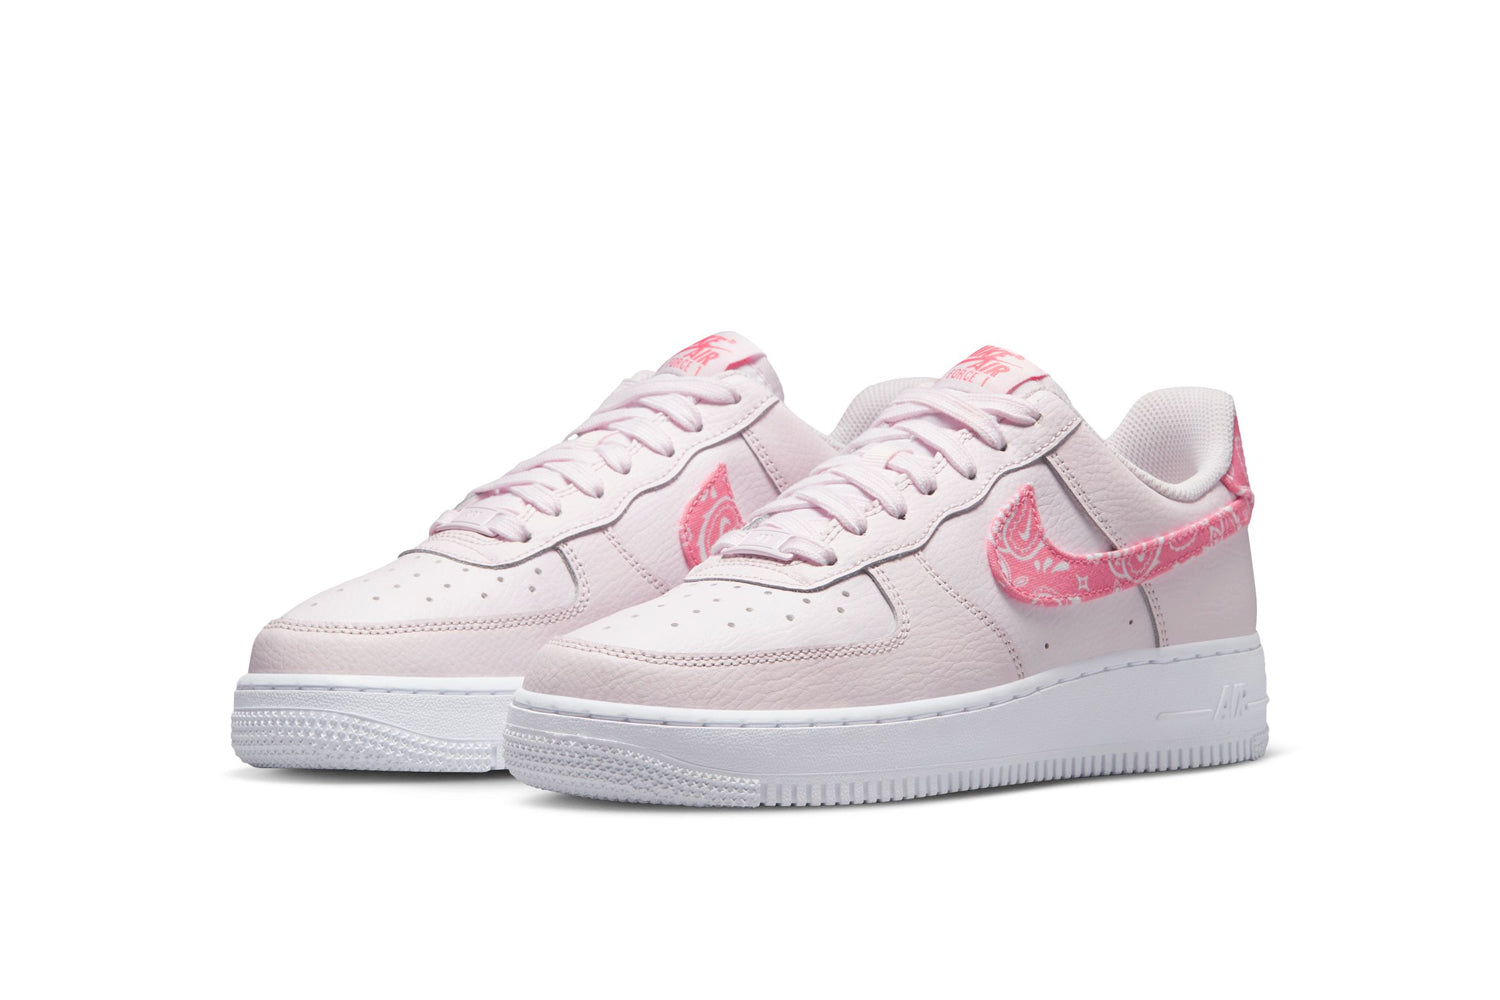 WOMEN'S AIR FORCE 1 LOW '07 PAISLEY PACK PINK – NRML